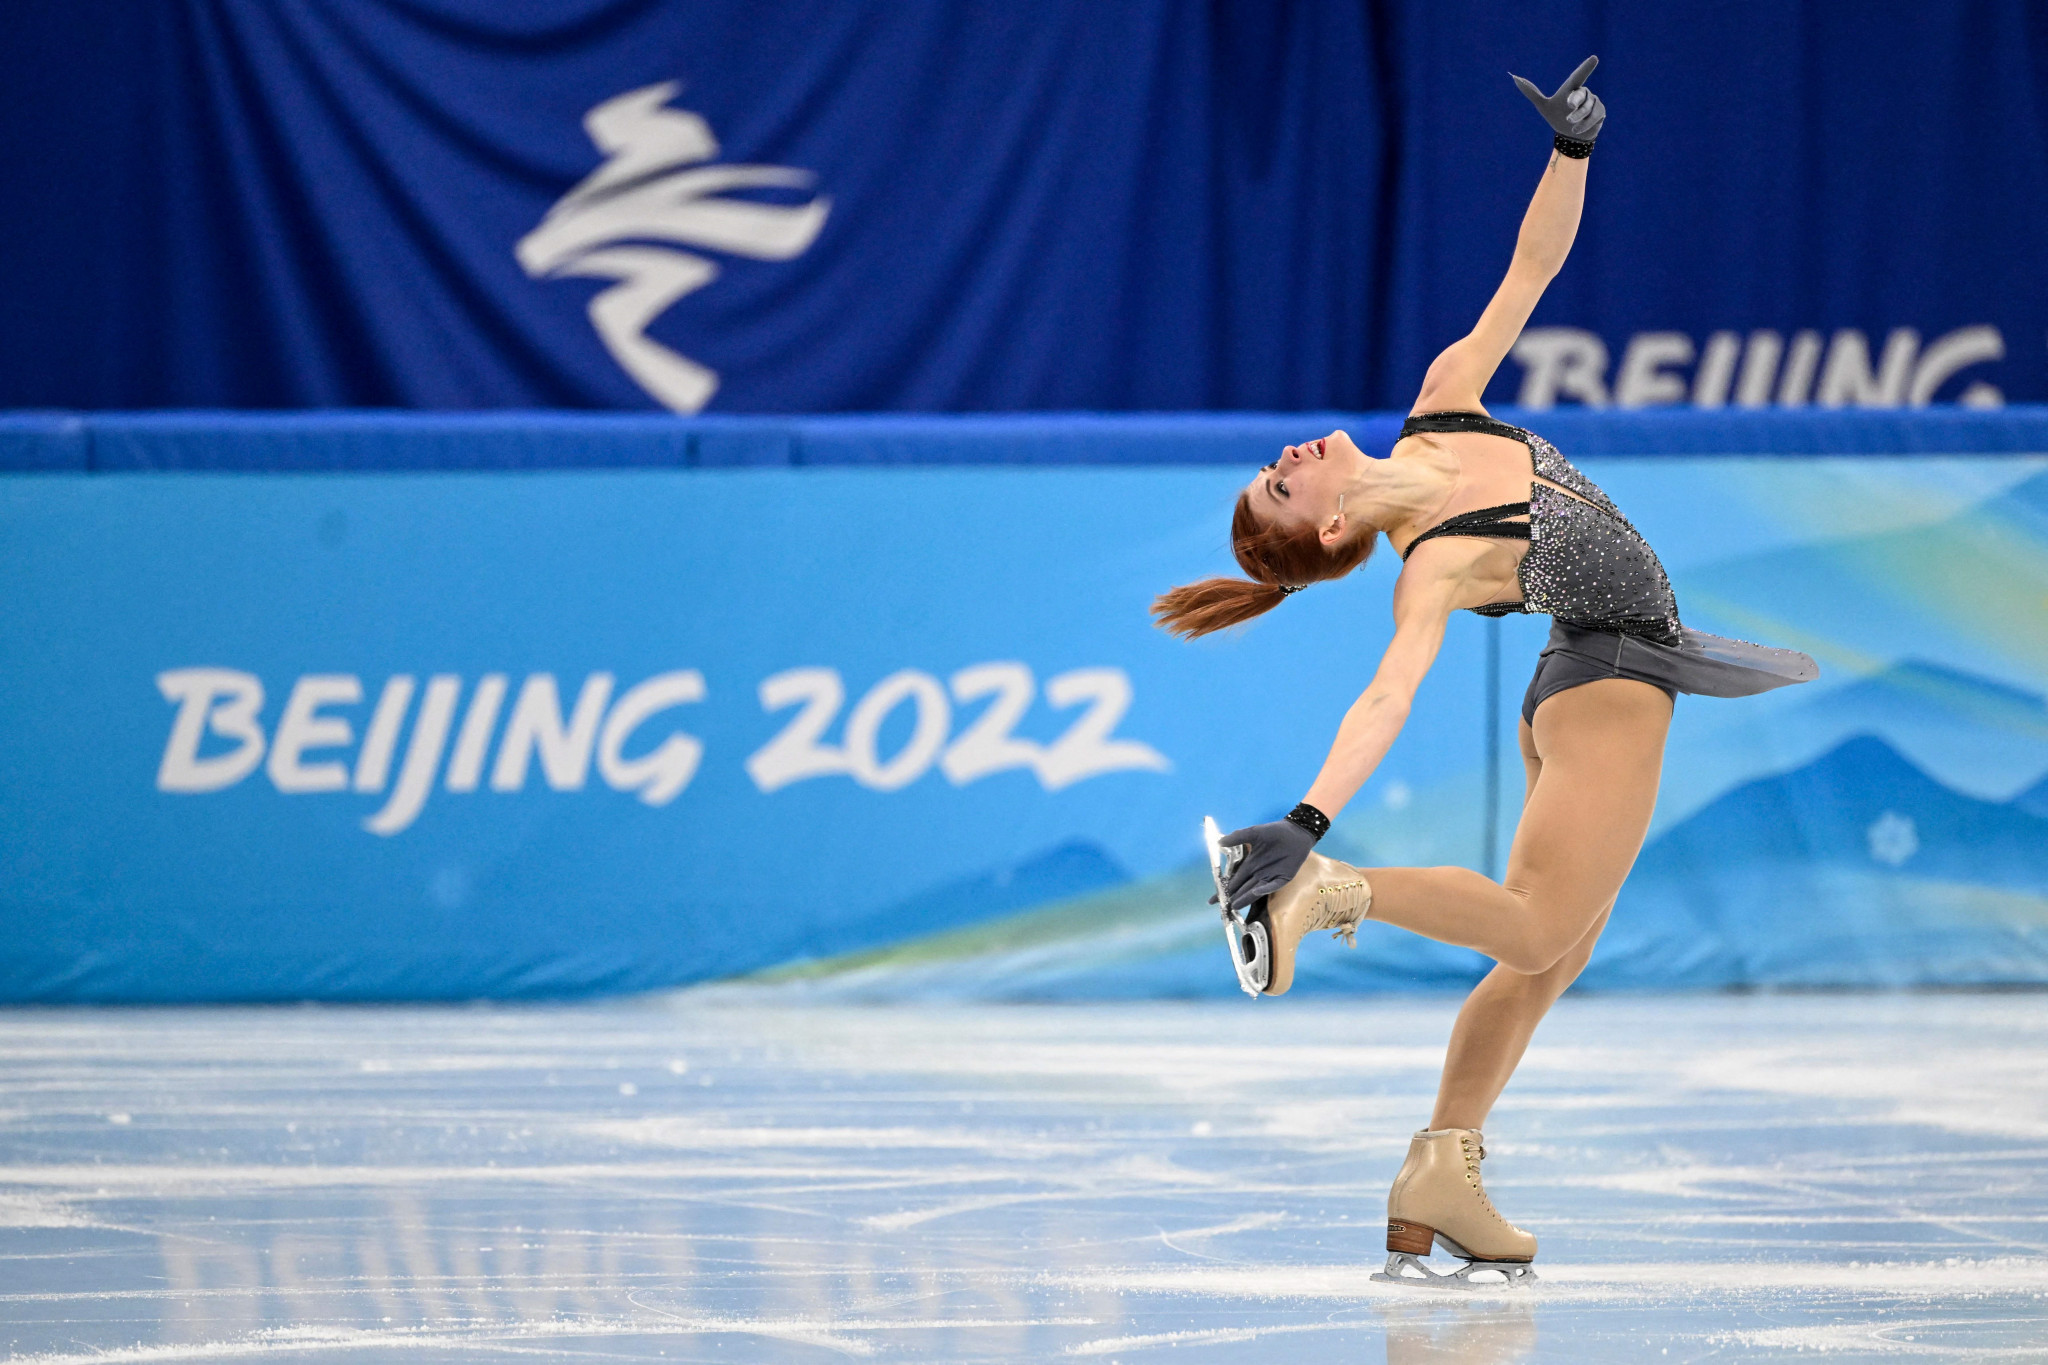 The figure skating competitions are underway at Beijing 2022 ©Getty Images